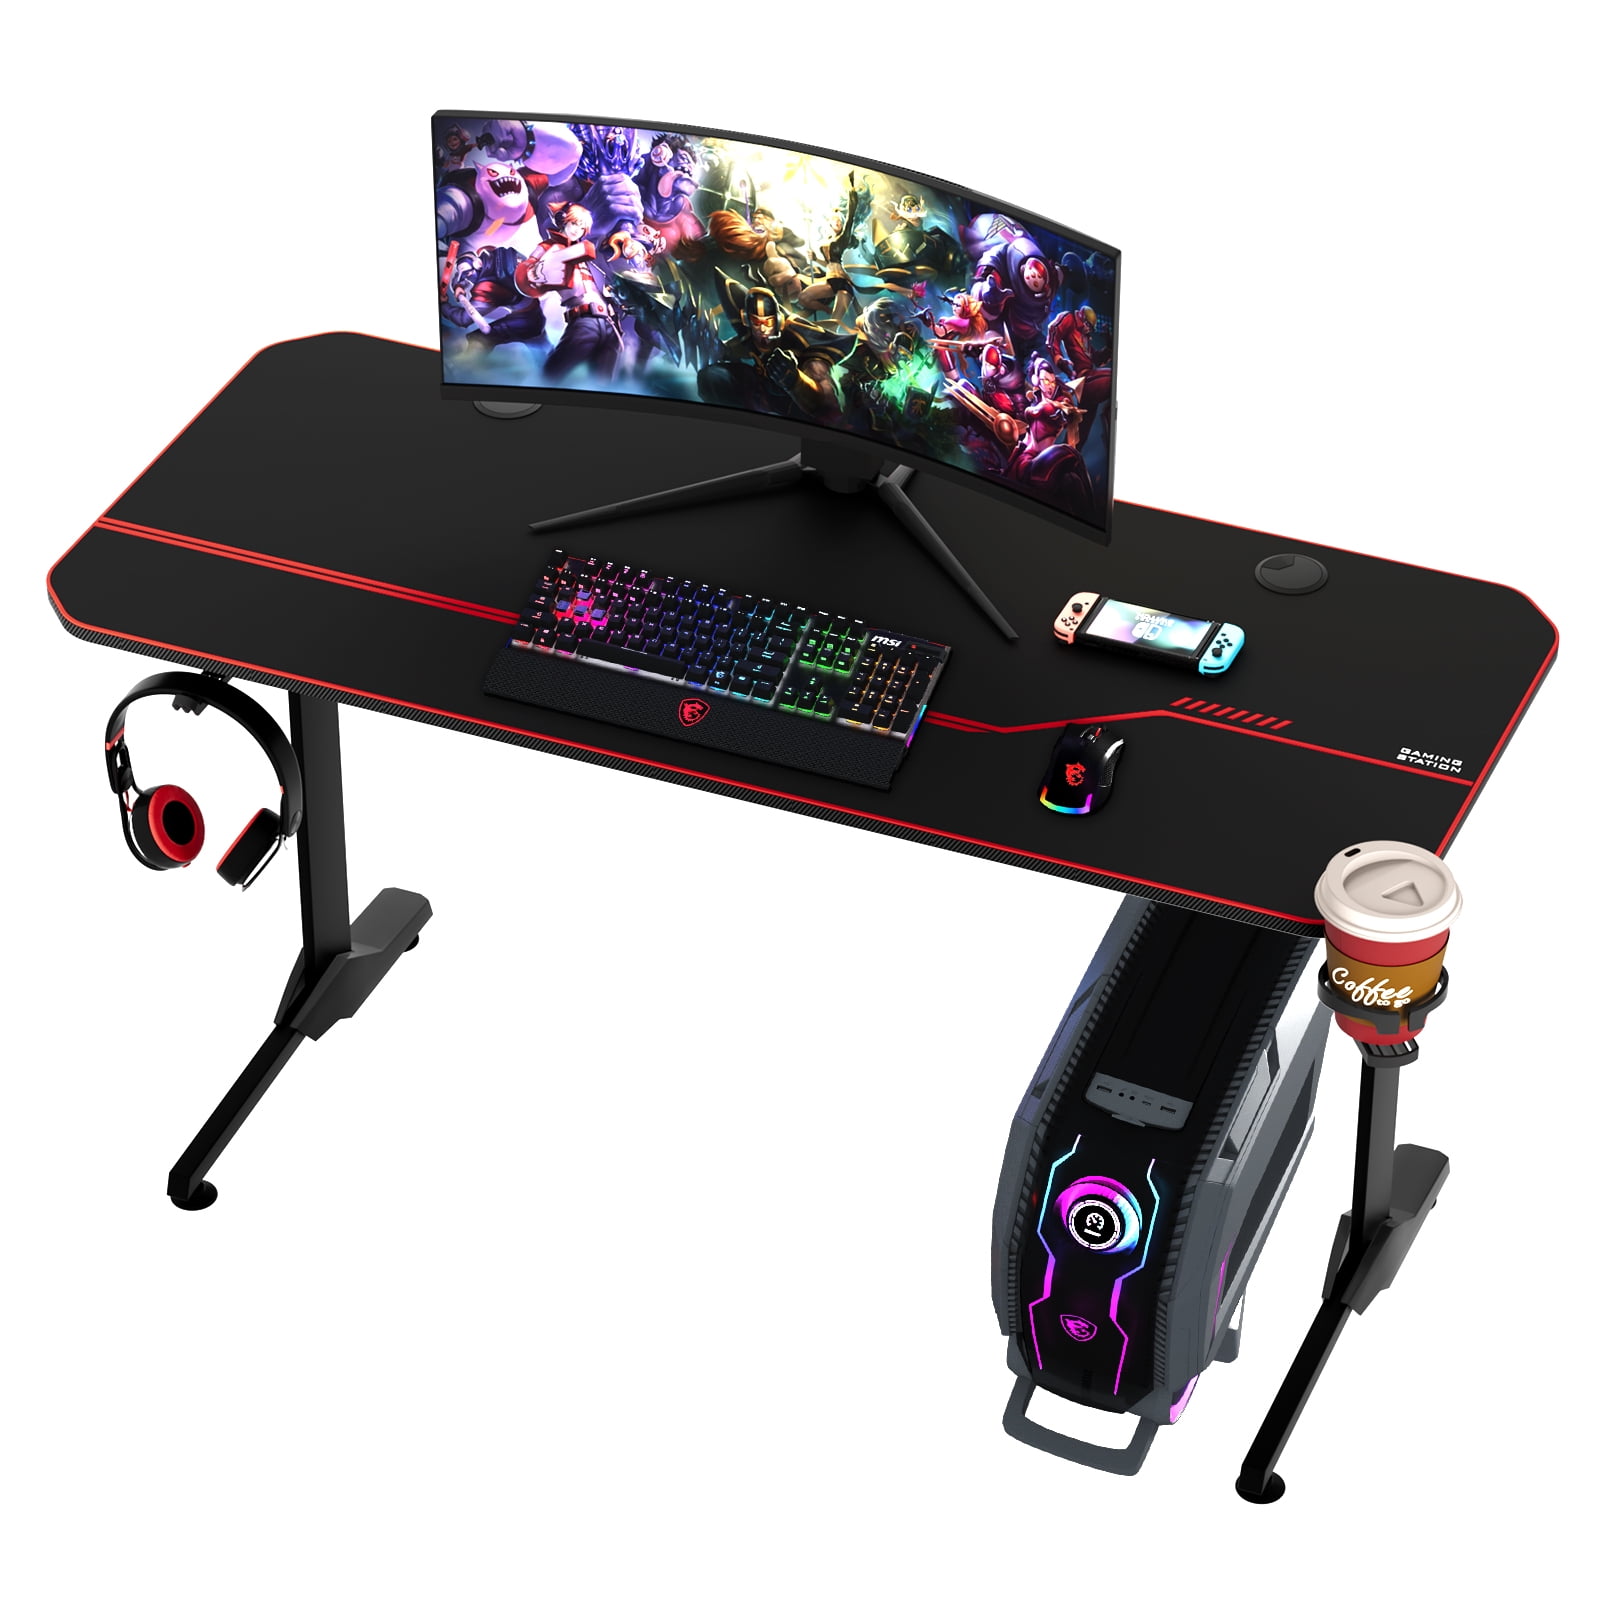 Arlopu 55″ Racing Style T-Shaped Gaming Computer Desk with Mouse Pad, Cup Holder & Headphone Hook